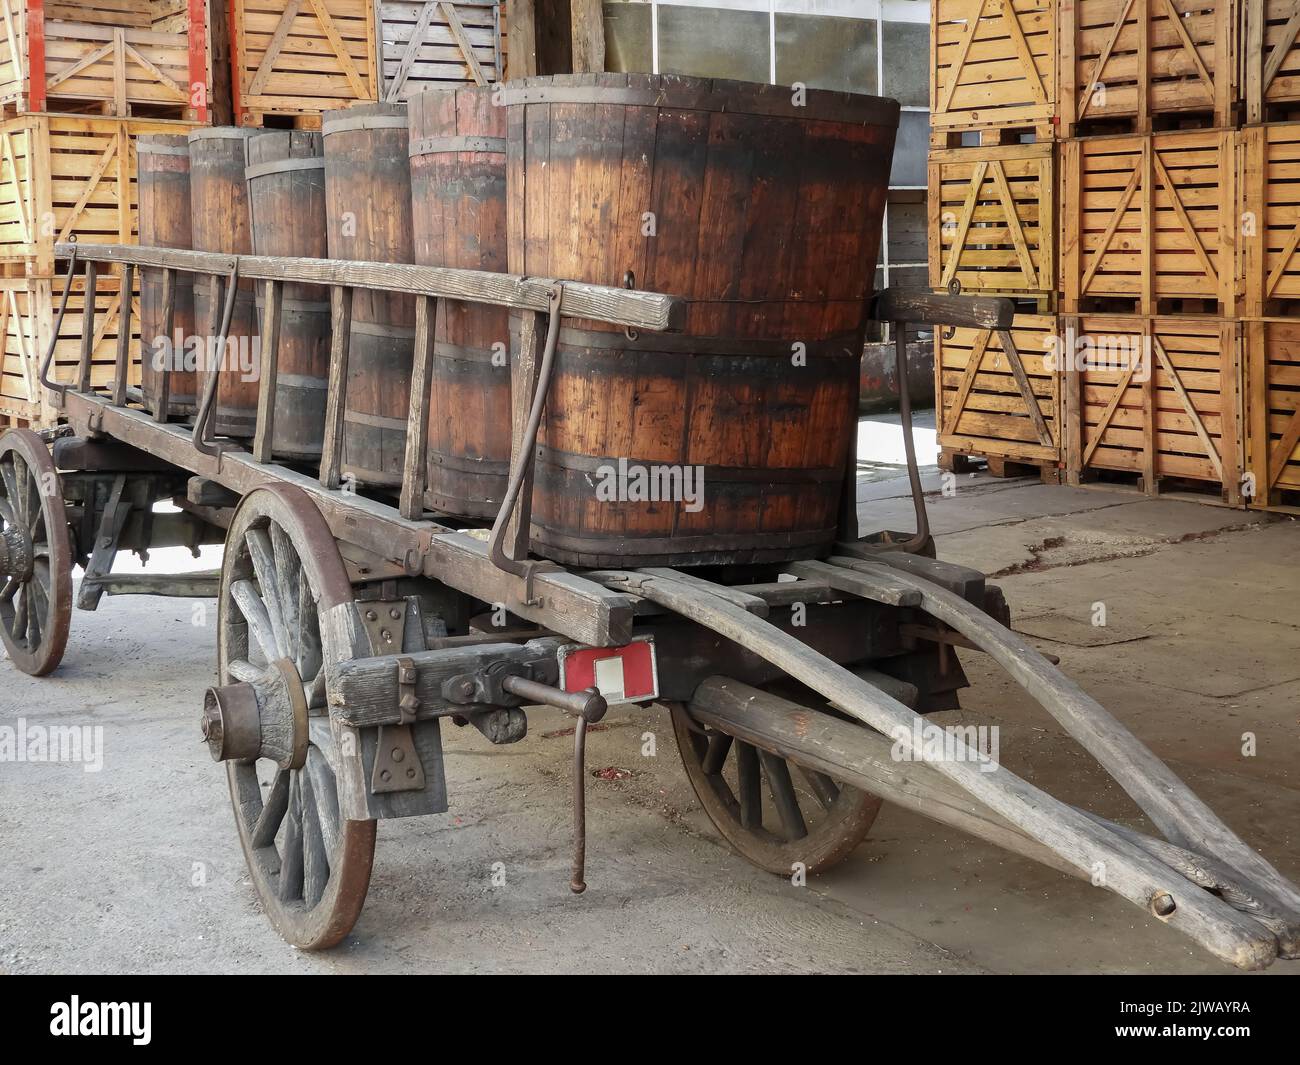 old wooden cart with wooden crates to hold wine bottles in the background Stock Photo